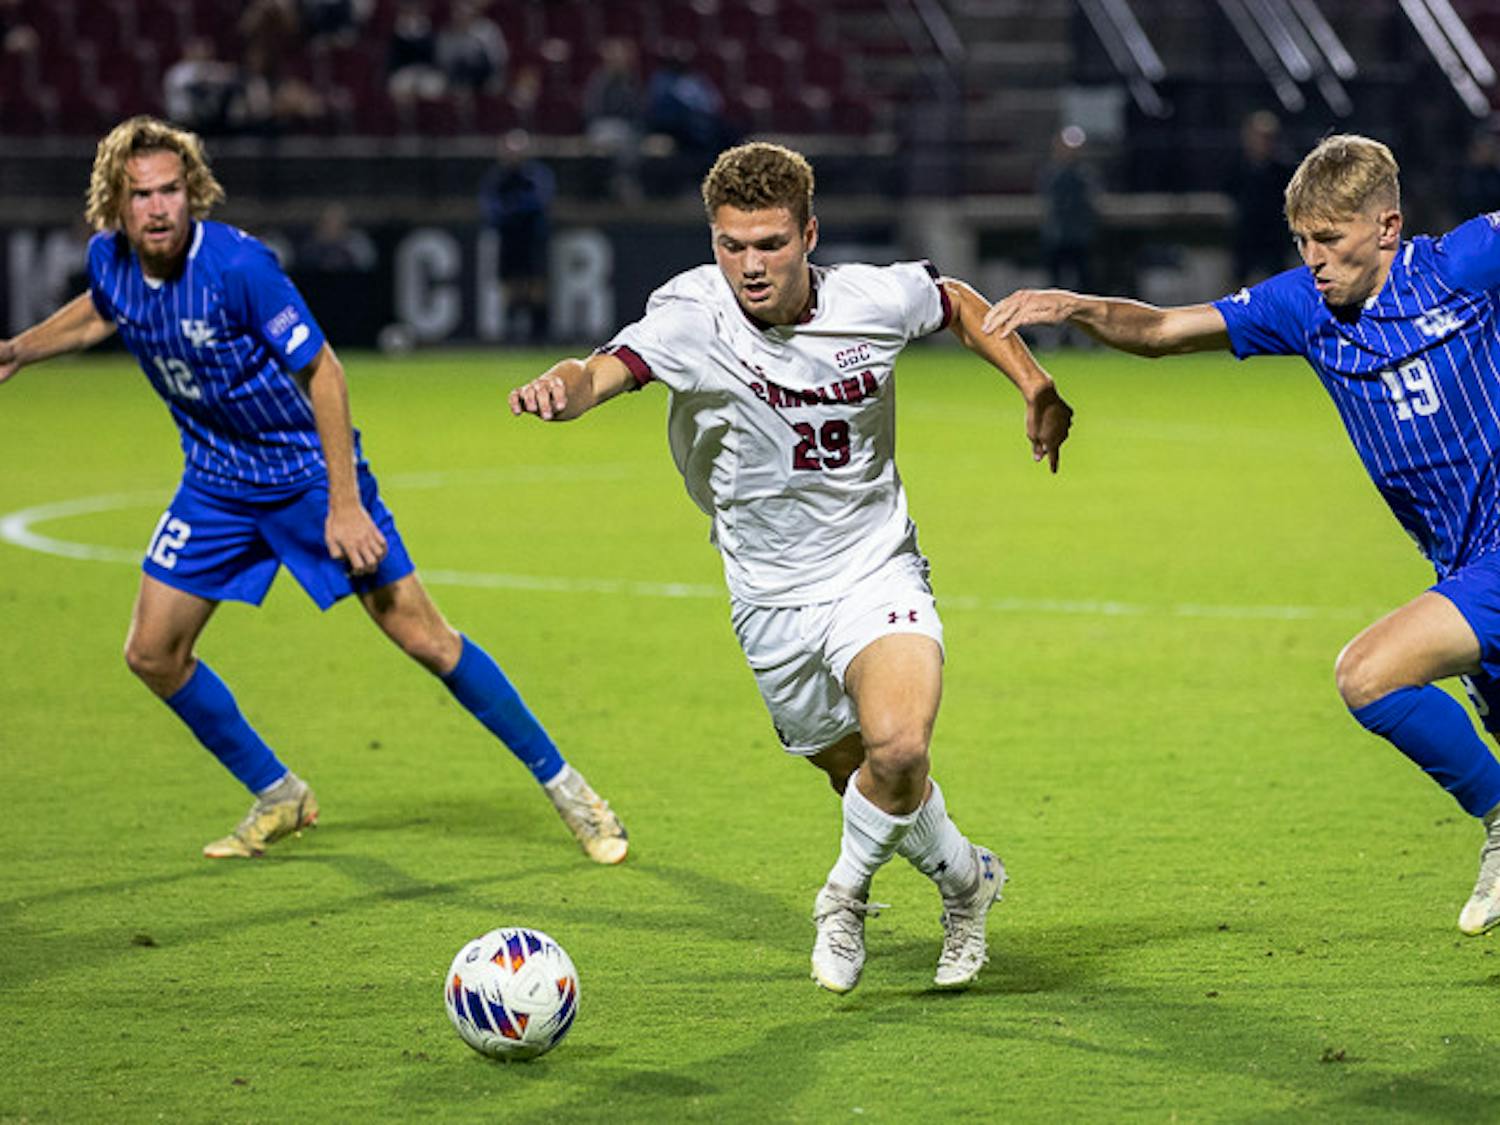 Freshman midfielder Micah Colodny runs the ball down the field during the matchup with Kentucky on Nov. 1, 2022. The Wildcats beat the Gamecocks 3-0.